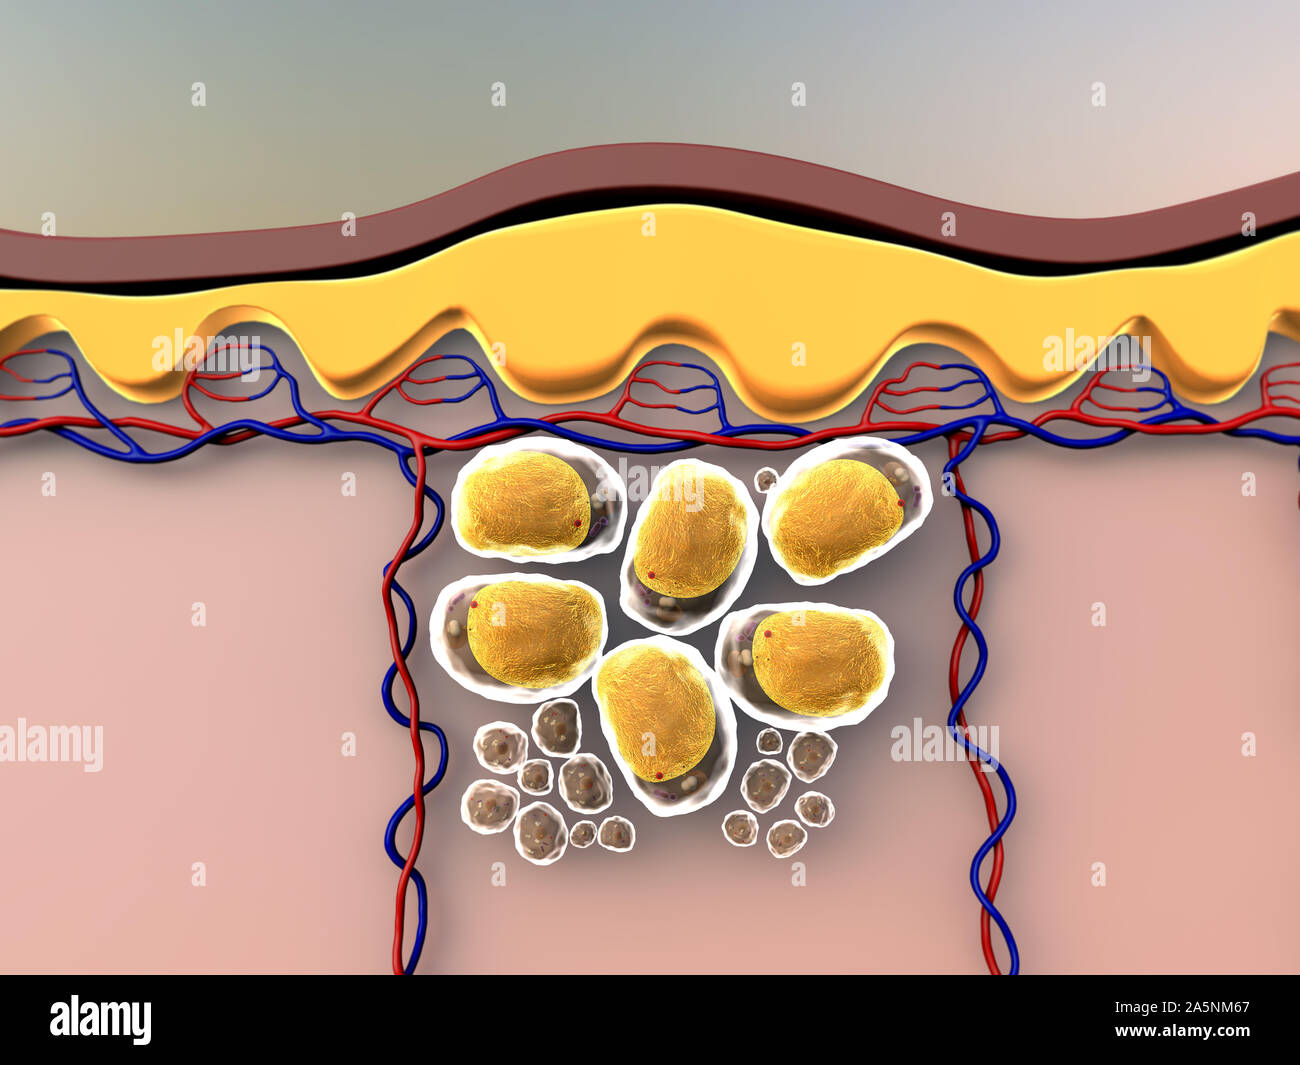 subcutaneous fat, illustration of human leather anatomy, fat cells and vein, fat cells under skin Stock Photo